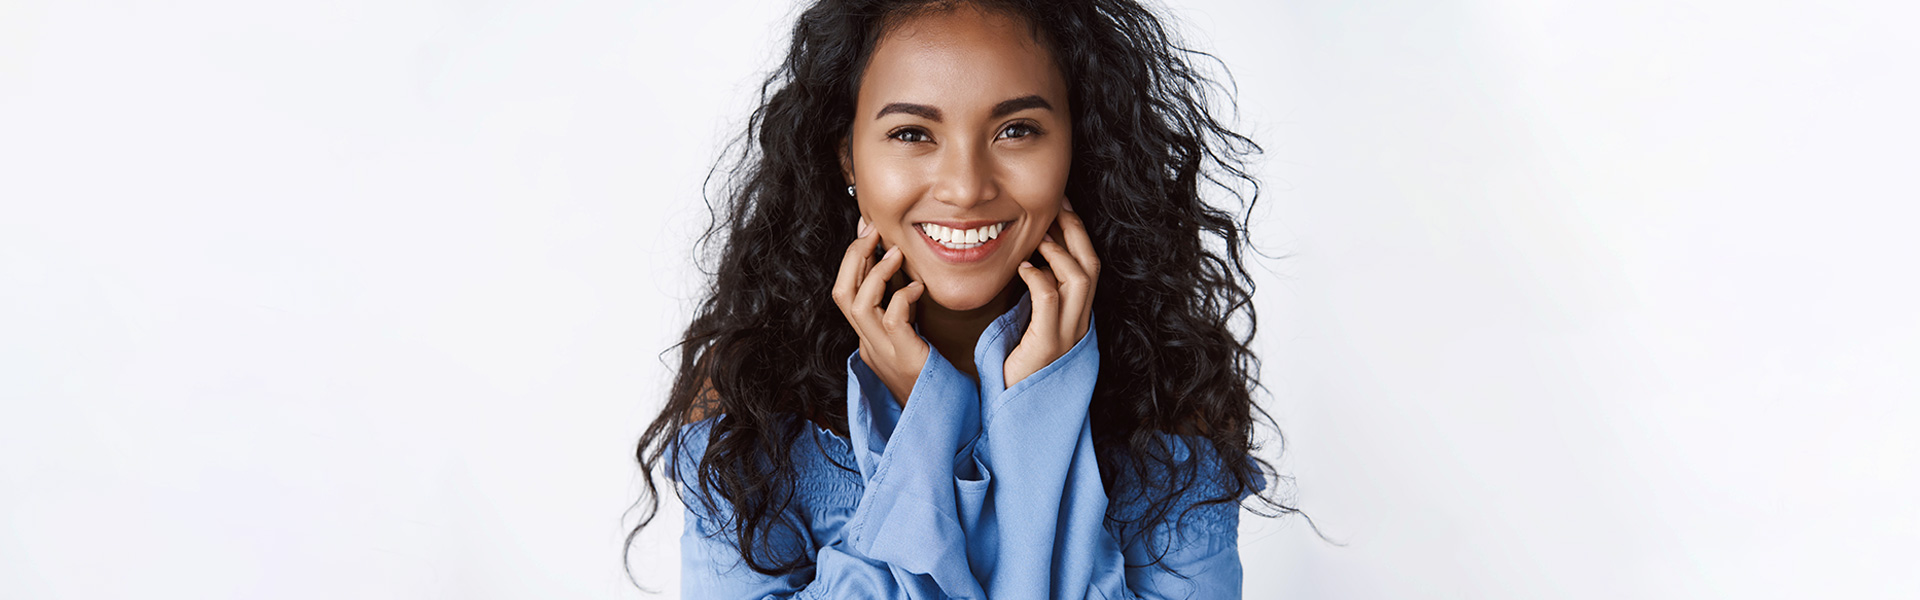 What would you do with a perfect smile? Here is how to straighten your teeth easy and convenient